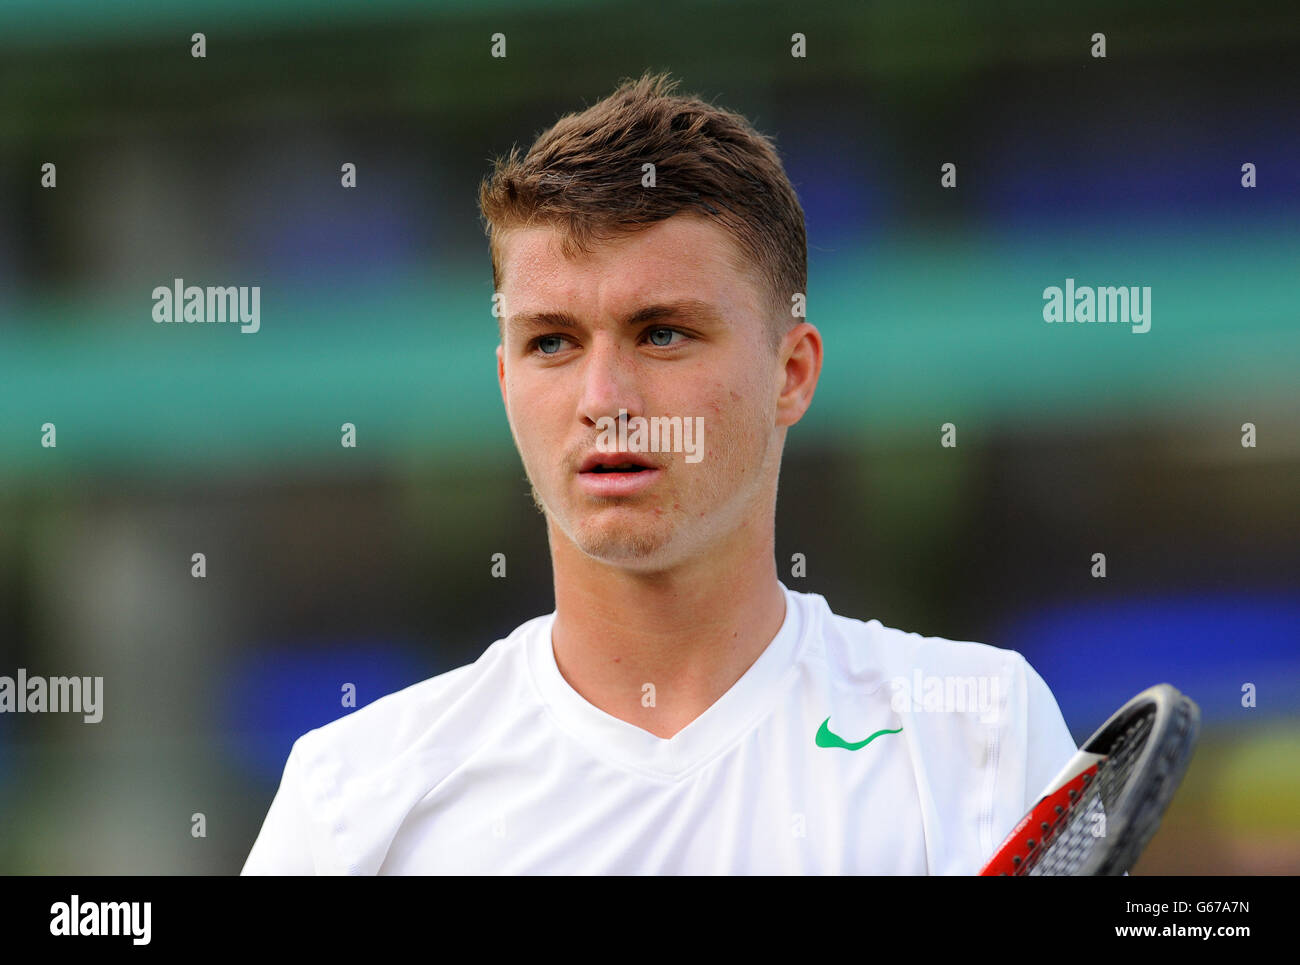 Great Britain's Jonny O'Mara plays against France's Maxime Janvier in his Boy's Singles match during day seven of the Wimbledon Championships at The All England Lawn Tennis and Croquet Club, Wimbledon. PRESS ASSOCIATION Photo. Picture date: Monday July 1, 2013. See PA story TENNIS Wimbledon. Photo credit should read: Dominic Lipinski/PA Wire. RESTRICTIONS: . No commercial use. No video emulation. No use with any unofficial third party logos. Stock Photo